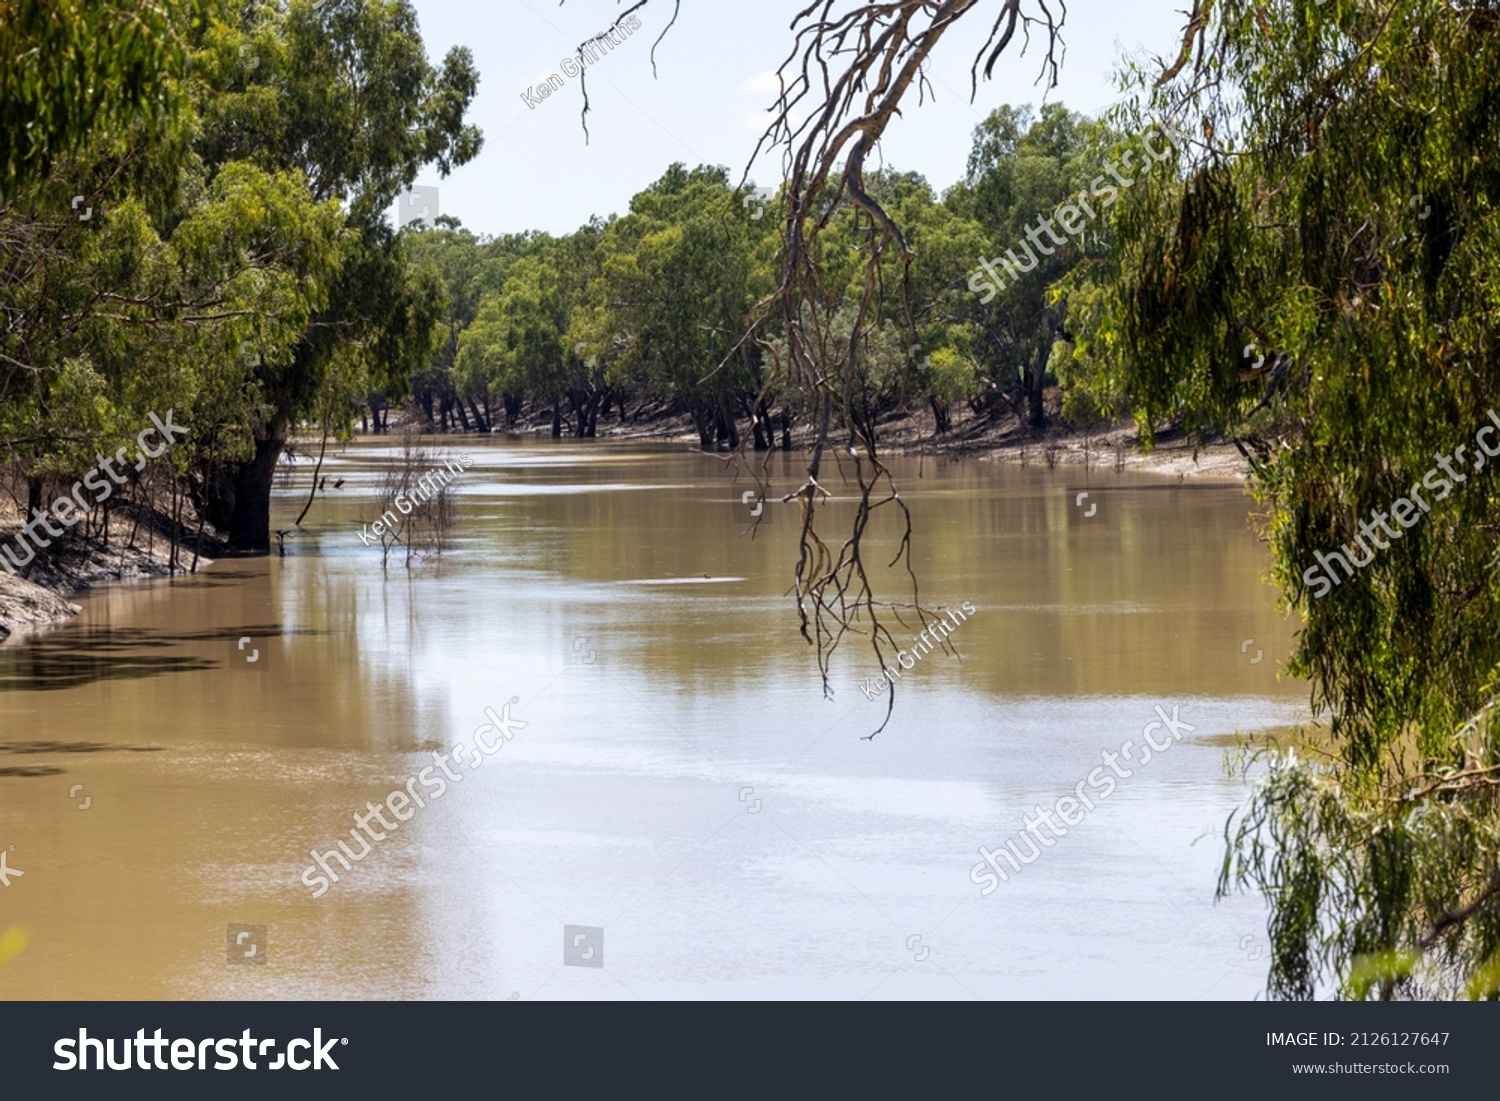 Darling River at Bourke New South Wales Australia #2126127647